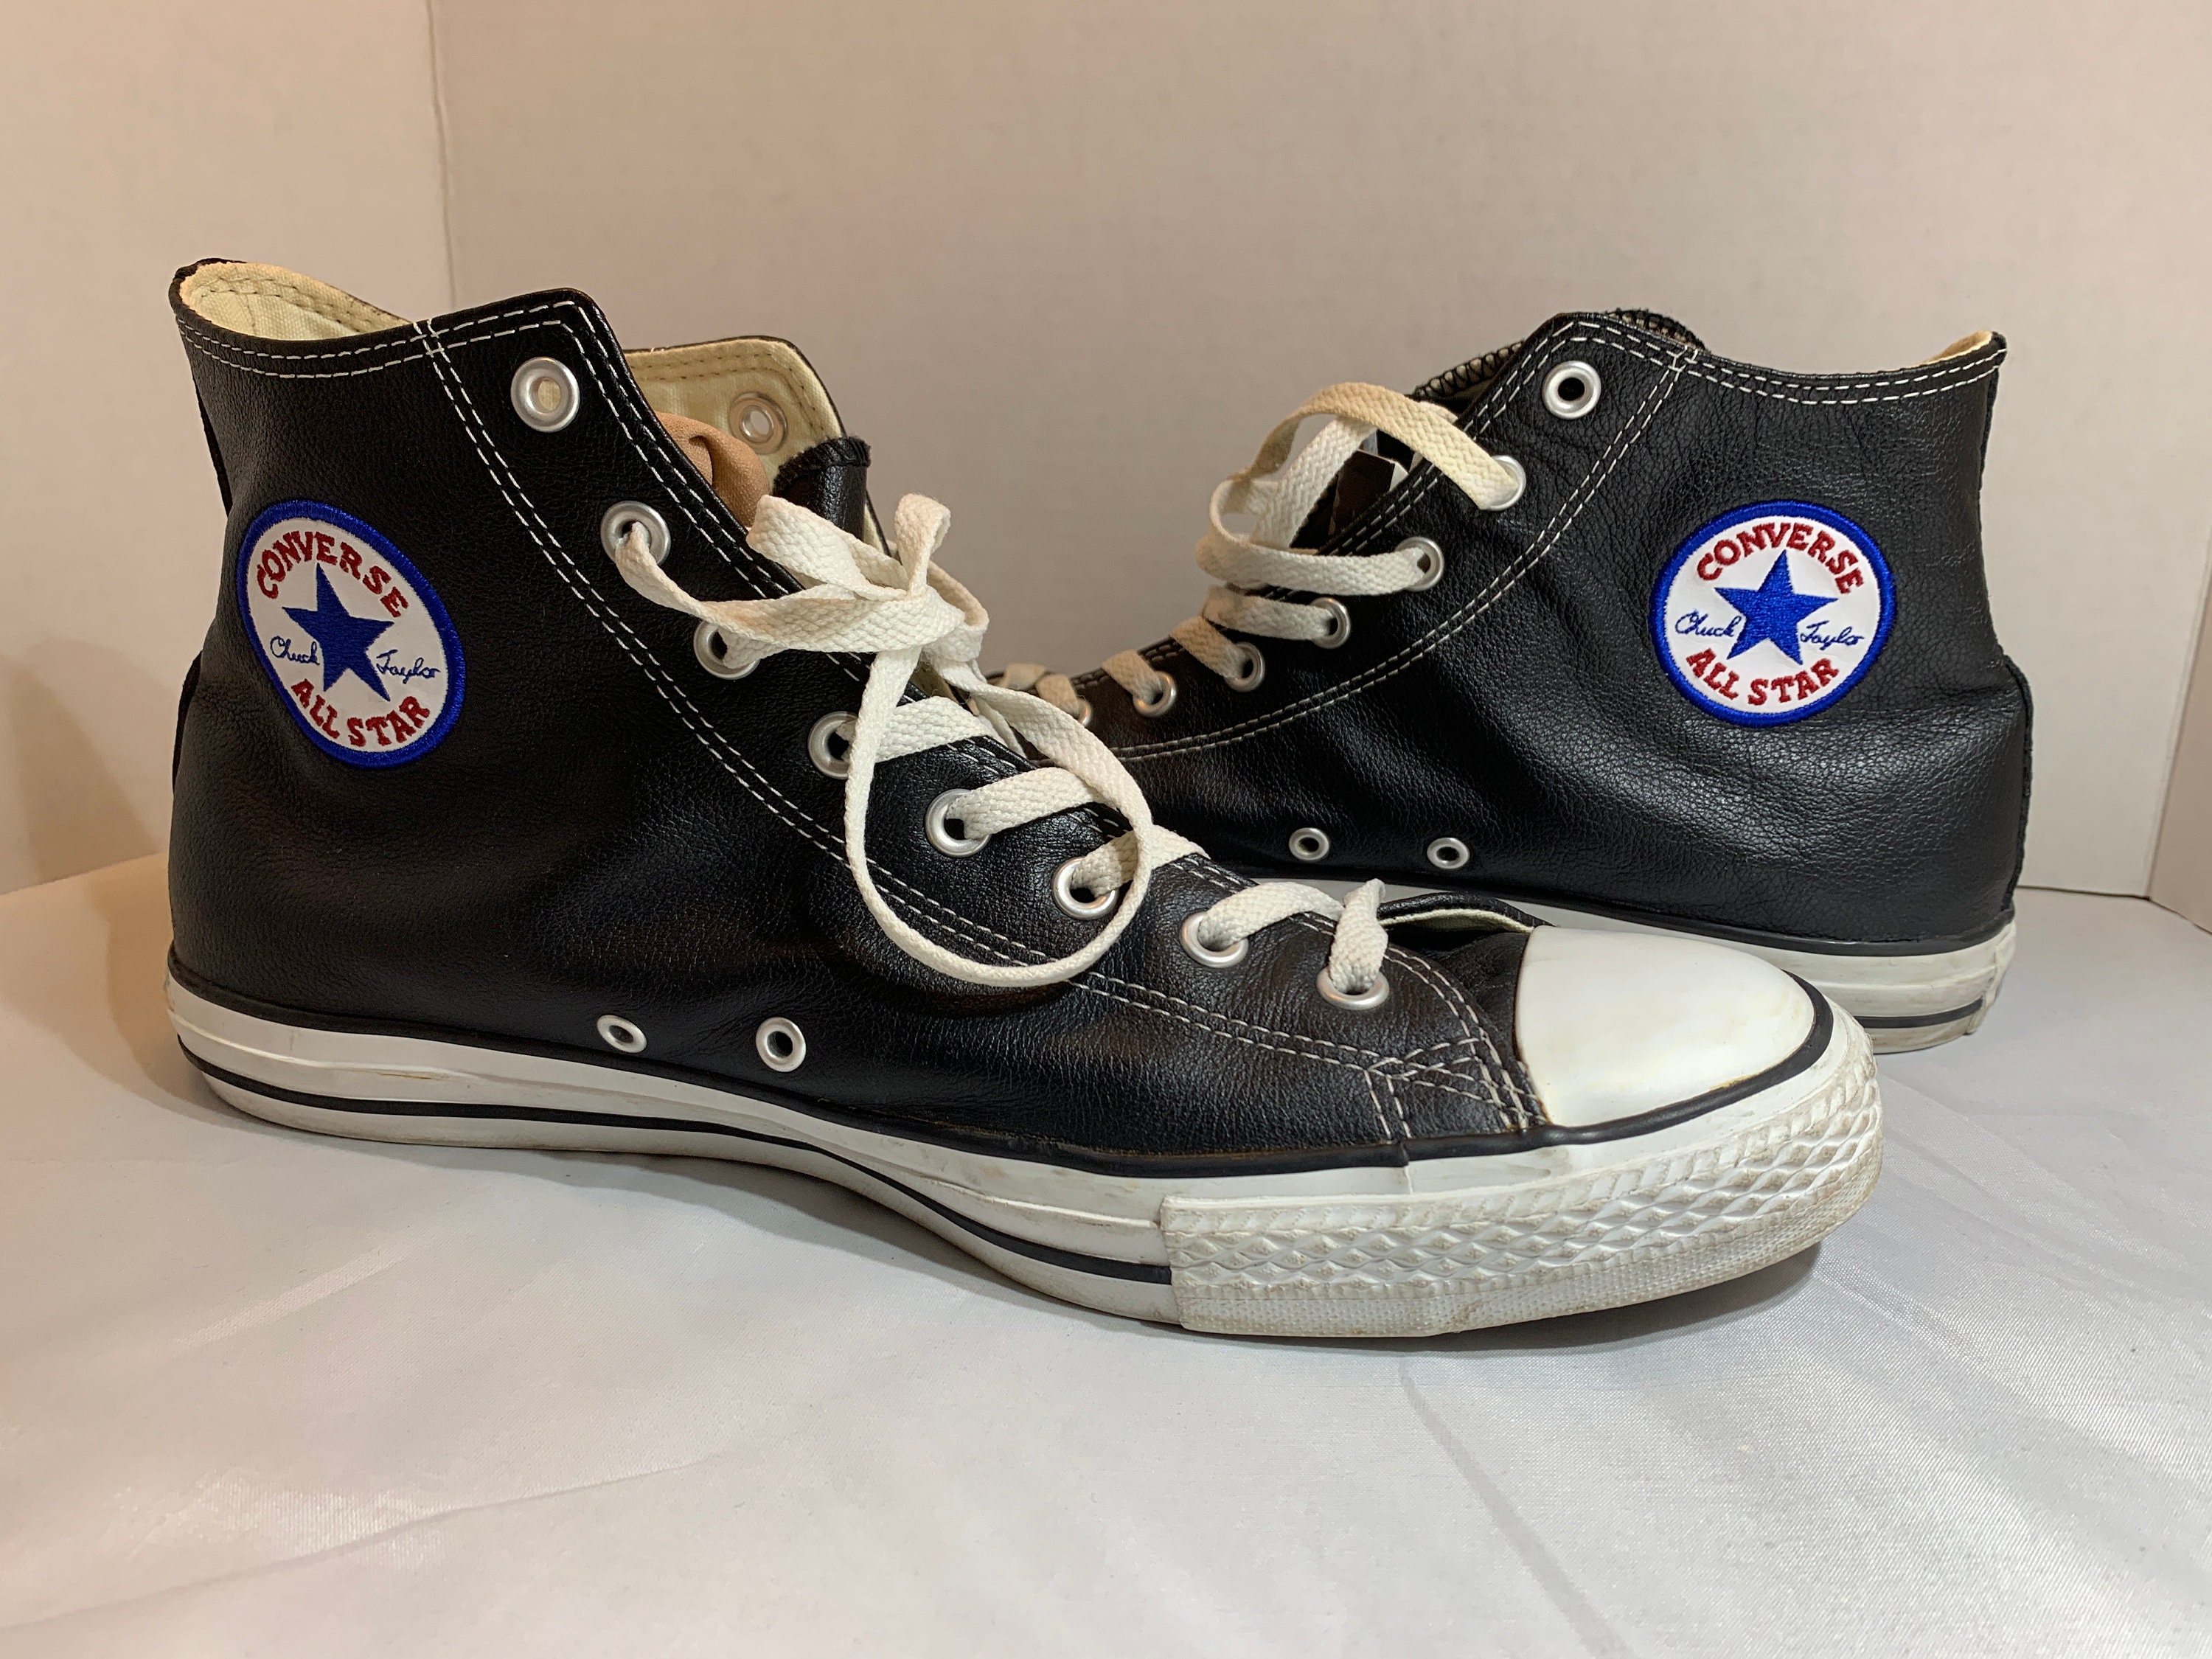 Vintage Black Leather Converse Shoes ~ 1980s Leather Converse Sneakers ...